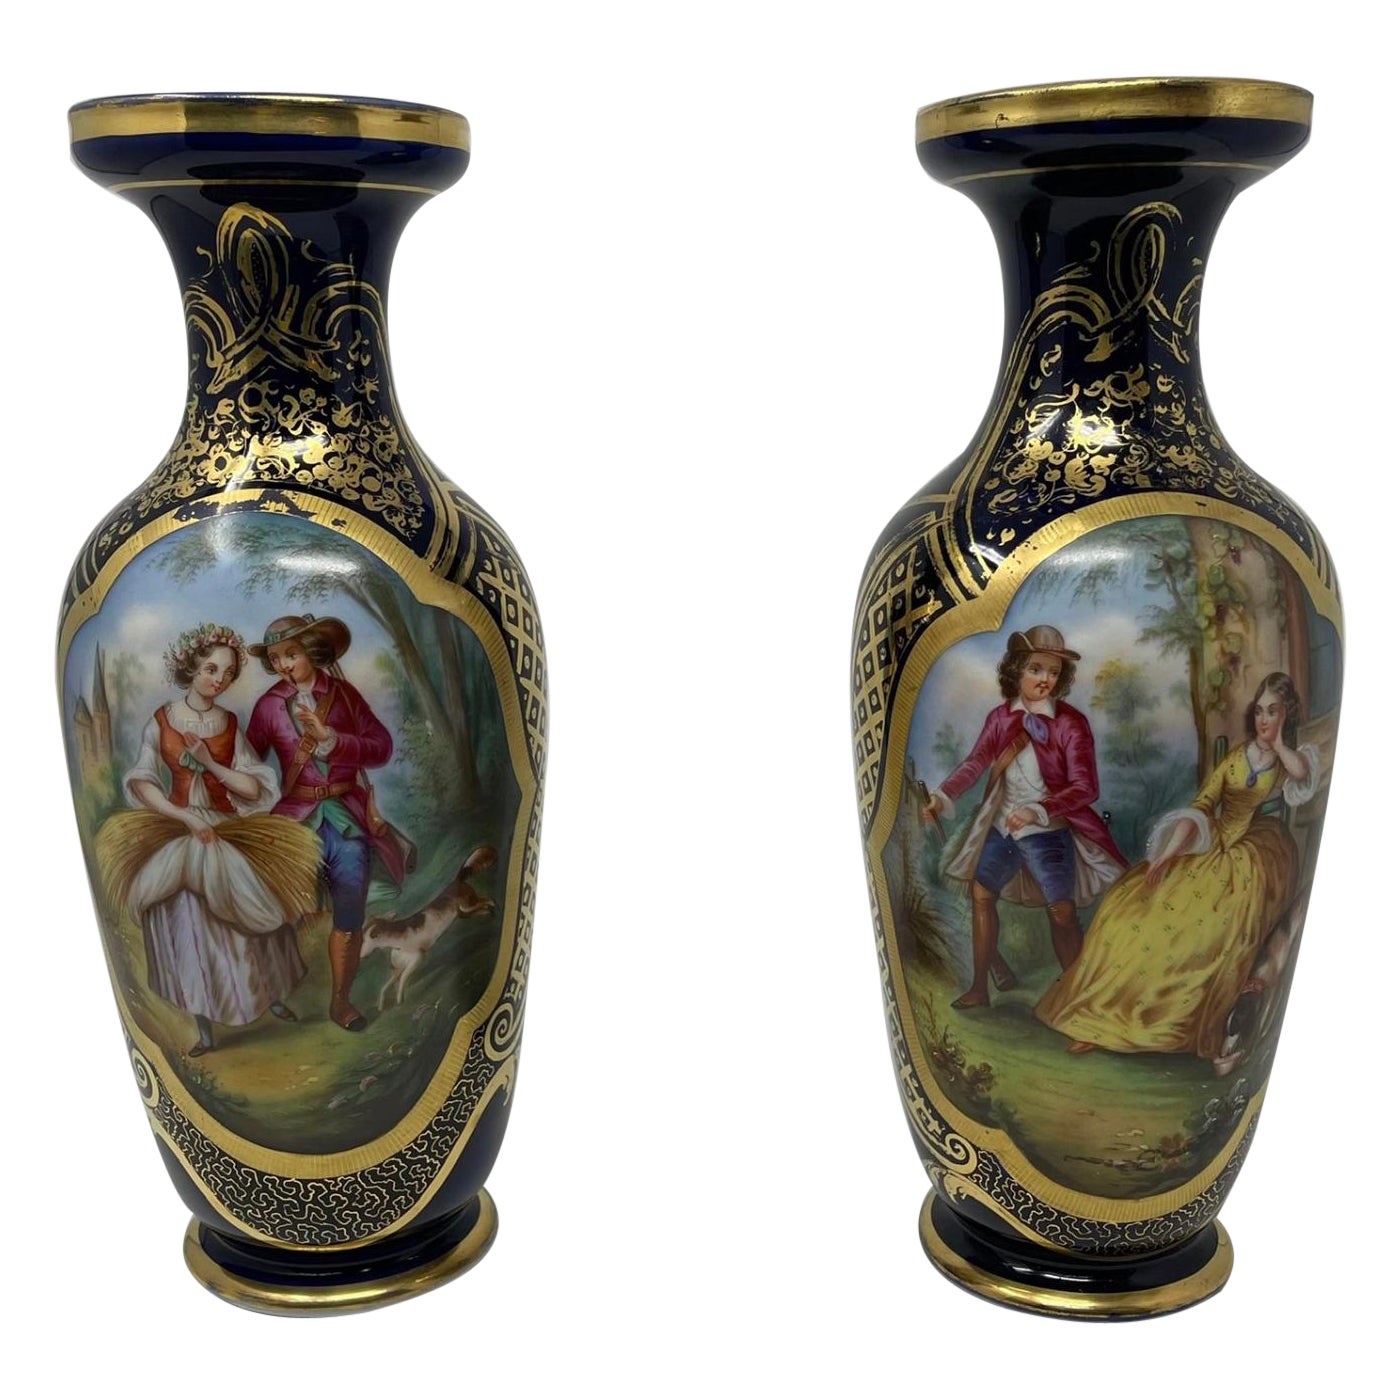 Antique French Gilded Porcelain Vases with Hand Painted Courting Scene - Pair For Sale